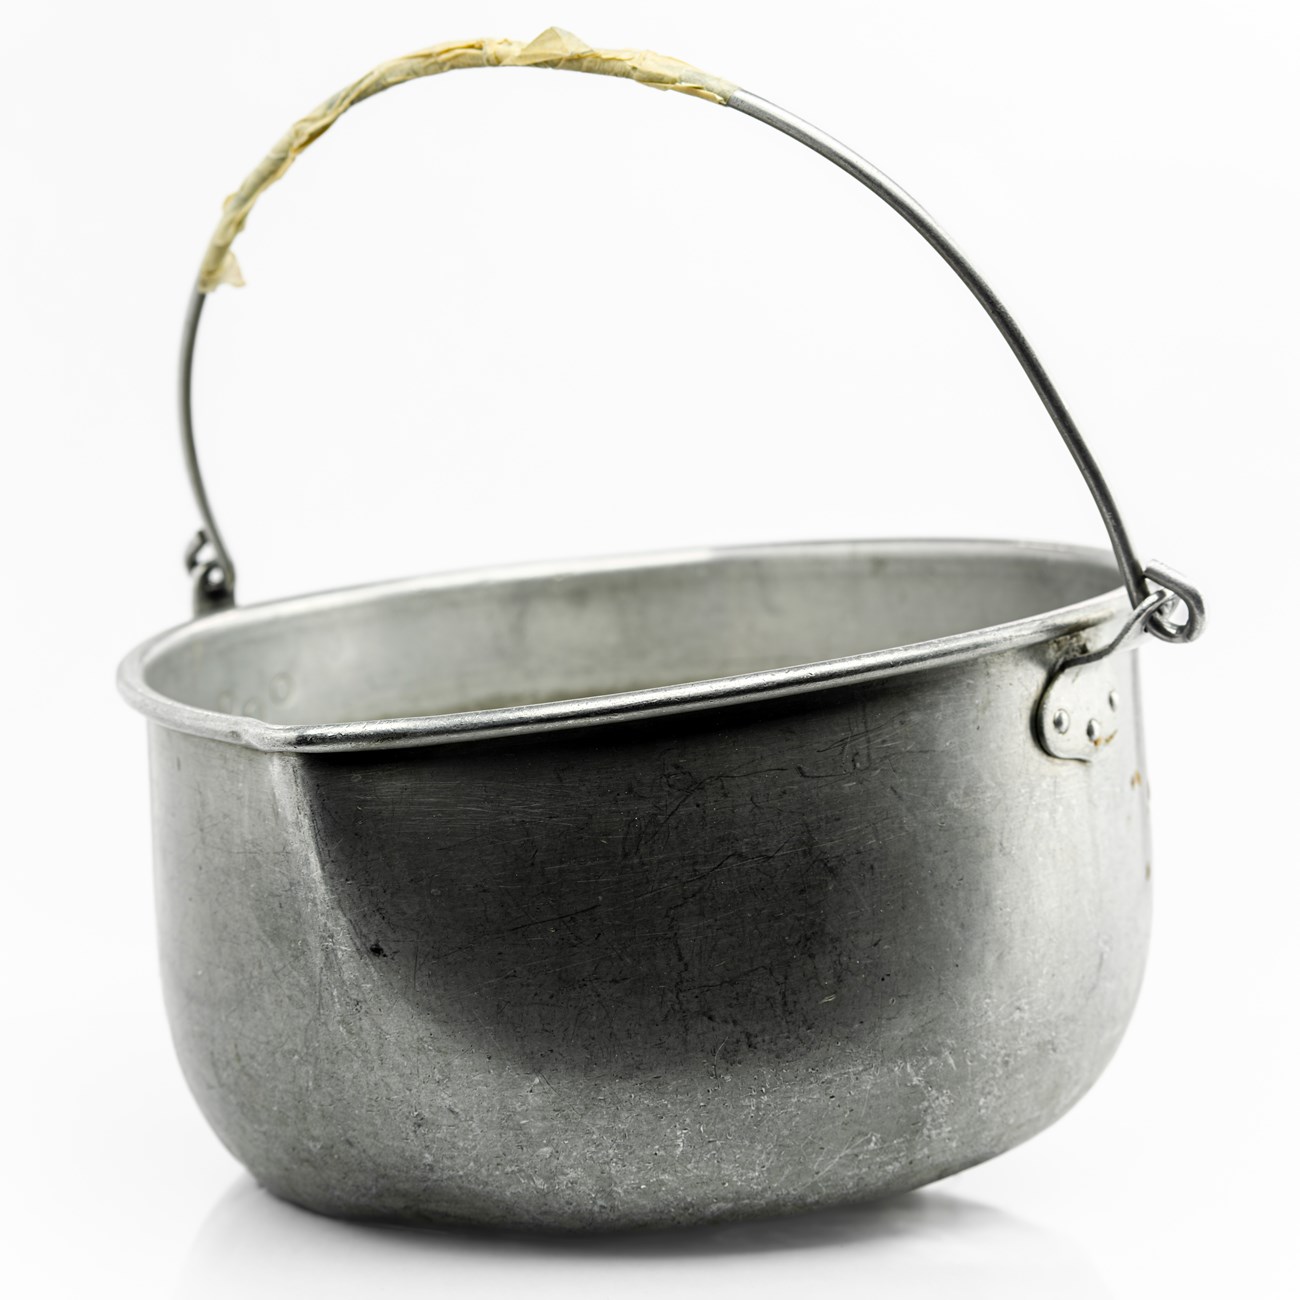 Metal pot with small spout and thin metal handle